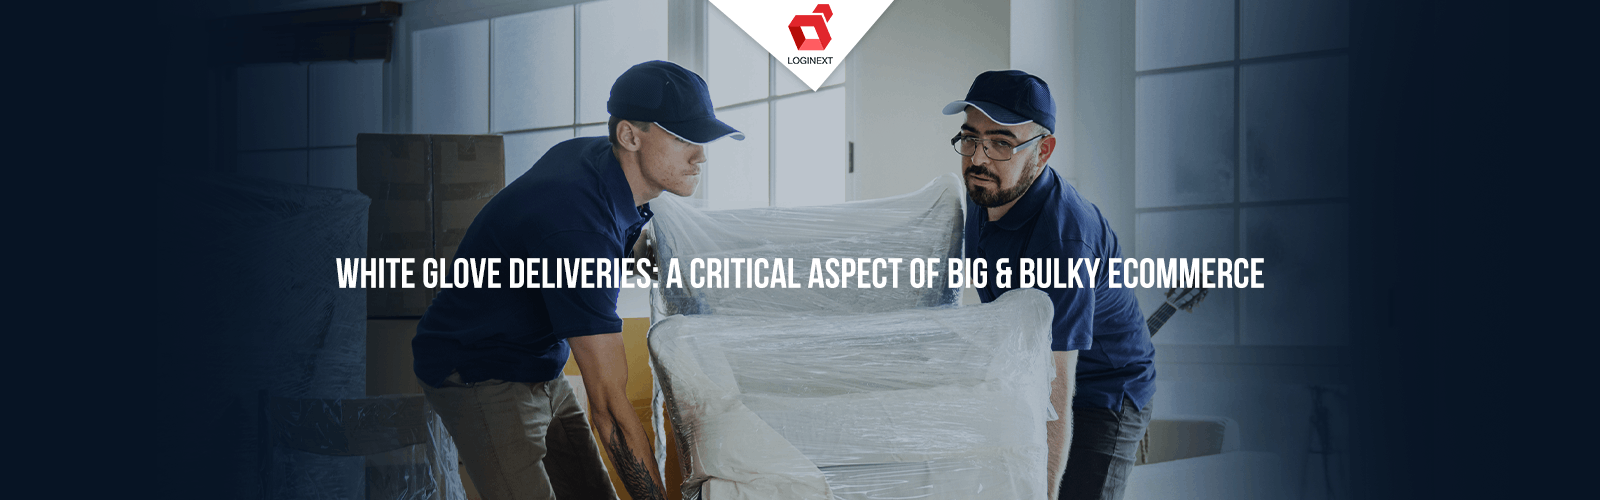 White Glove Deliveries: A Critical Aspect of Big & Bulky eCommerce